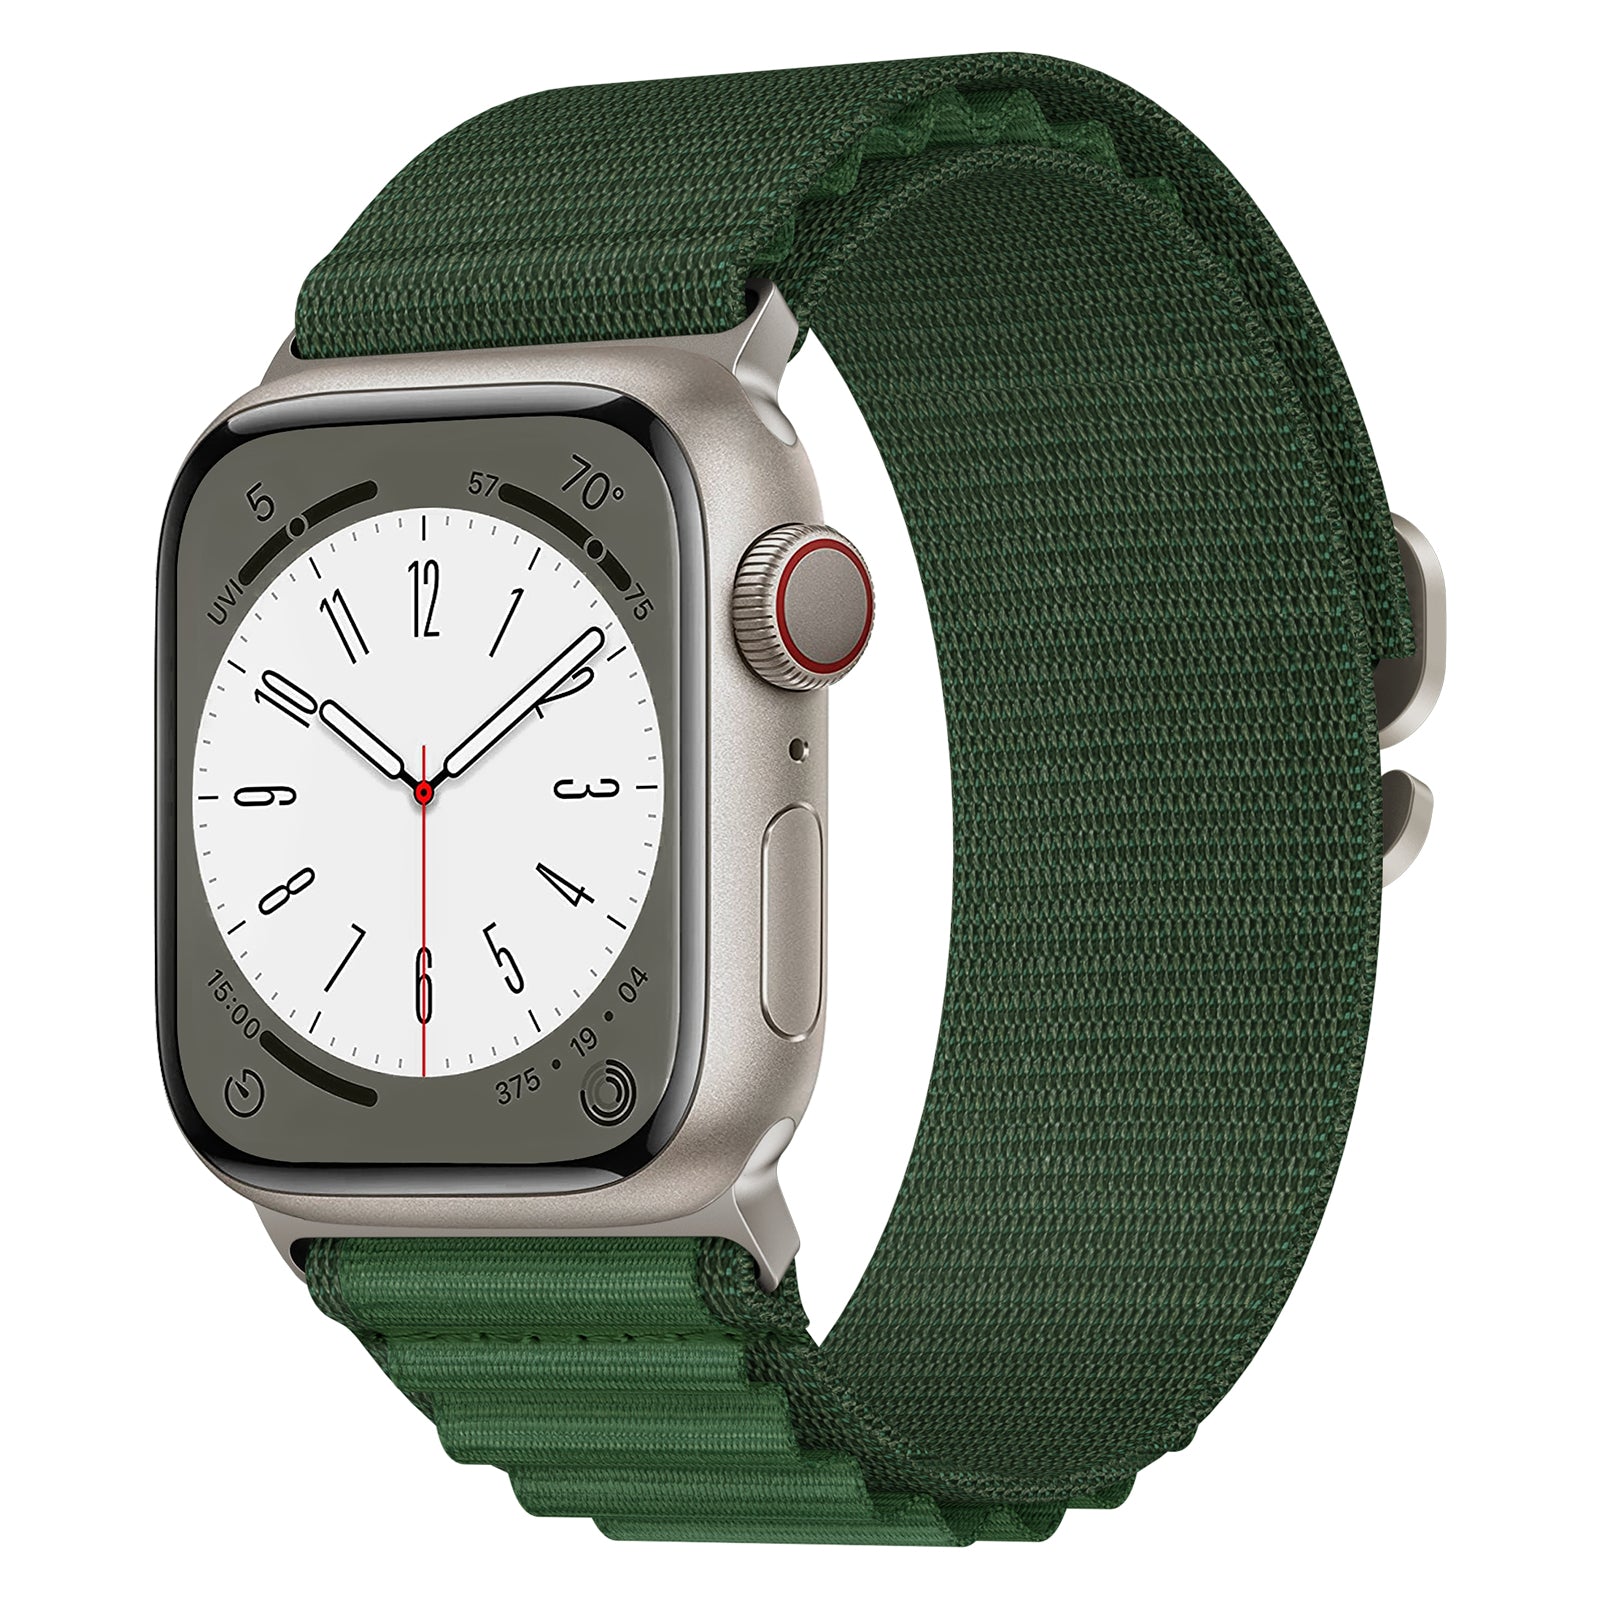 Nylon Alpine Loop band for Apple Watch green with watch